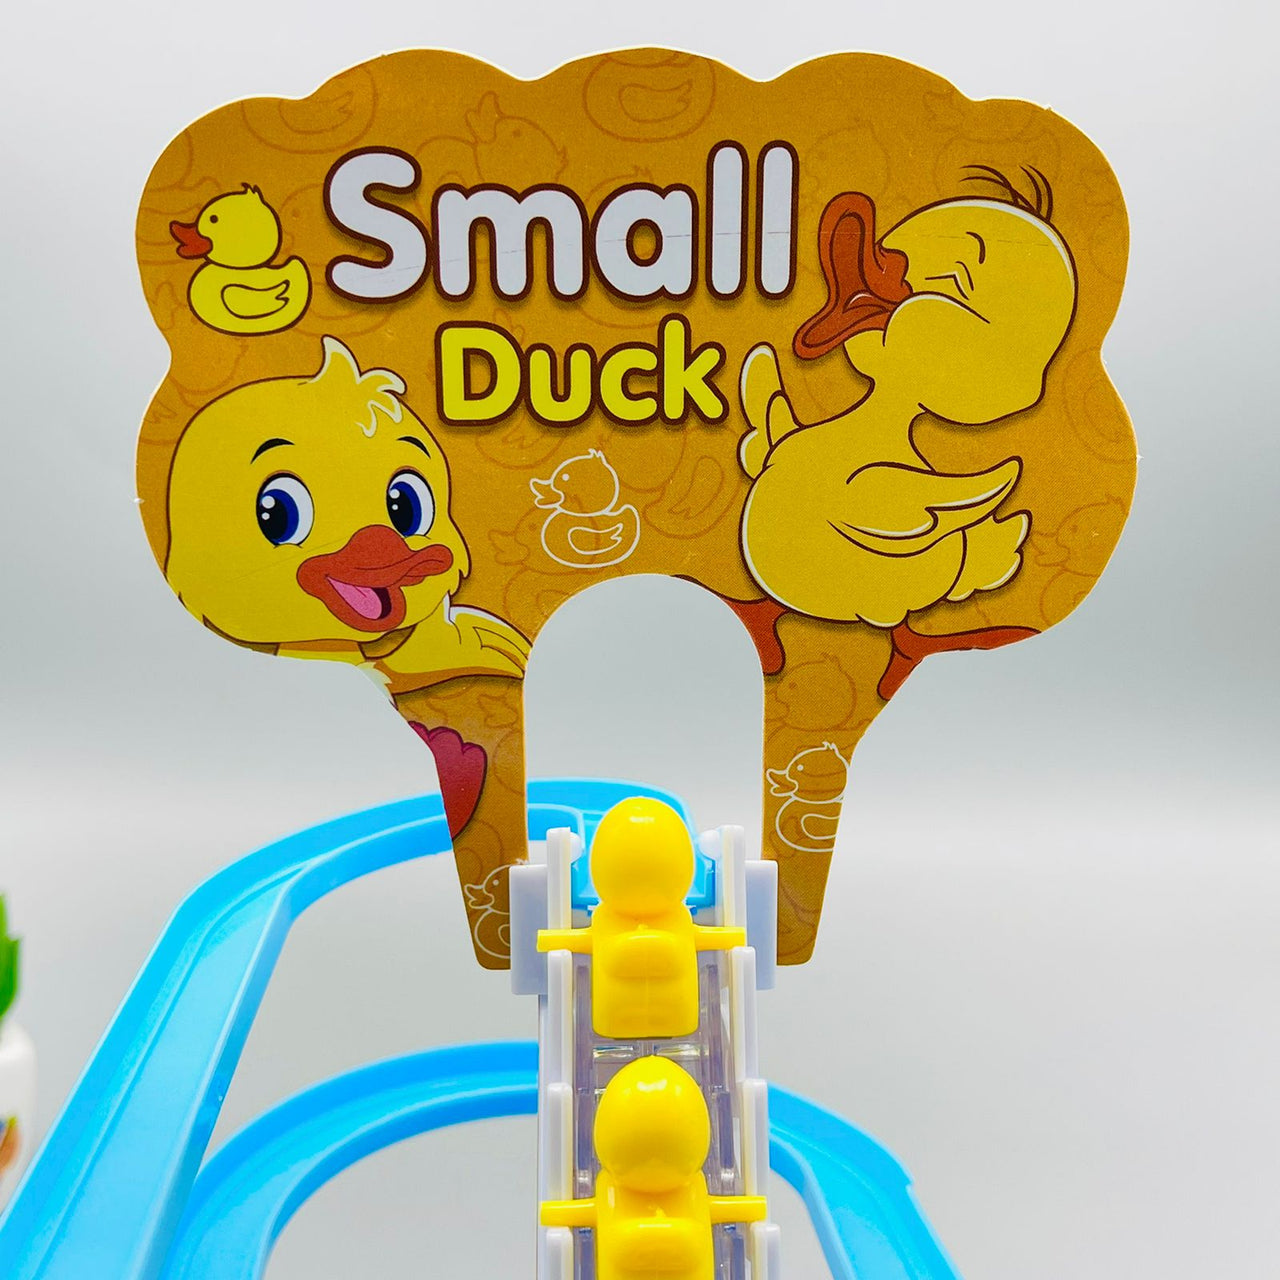 Duck Chase & Race Track Set